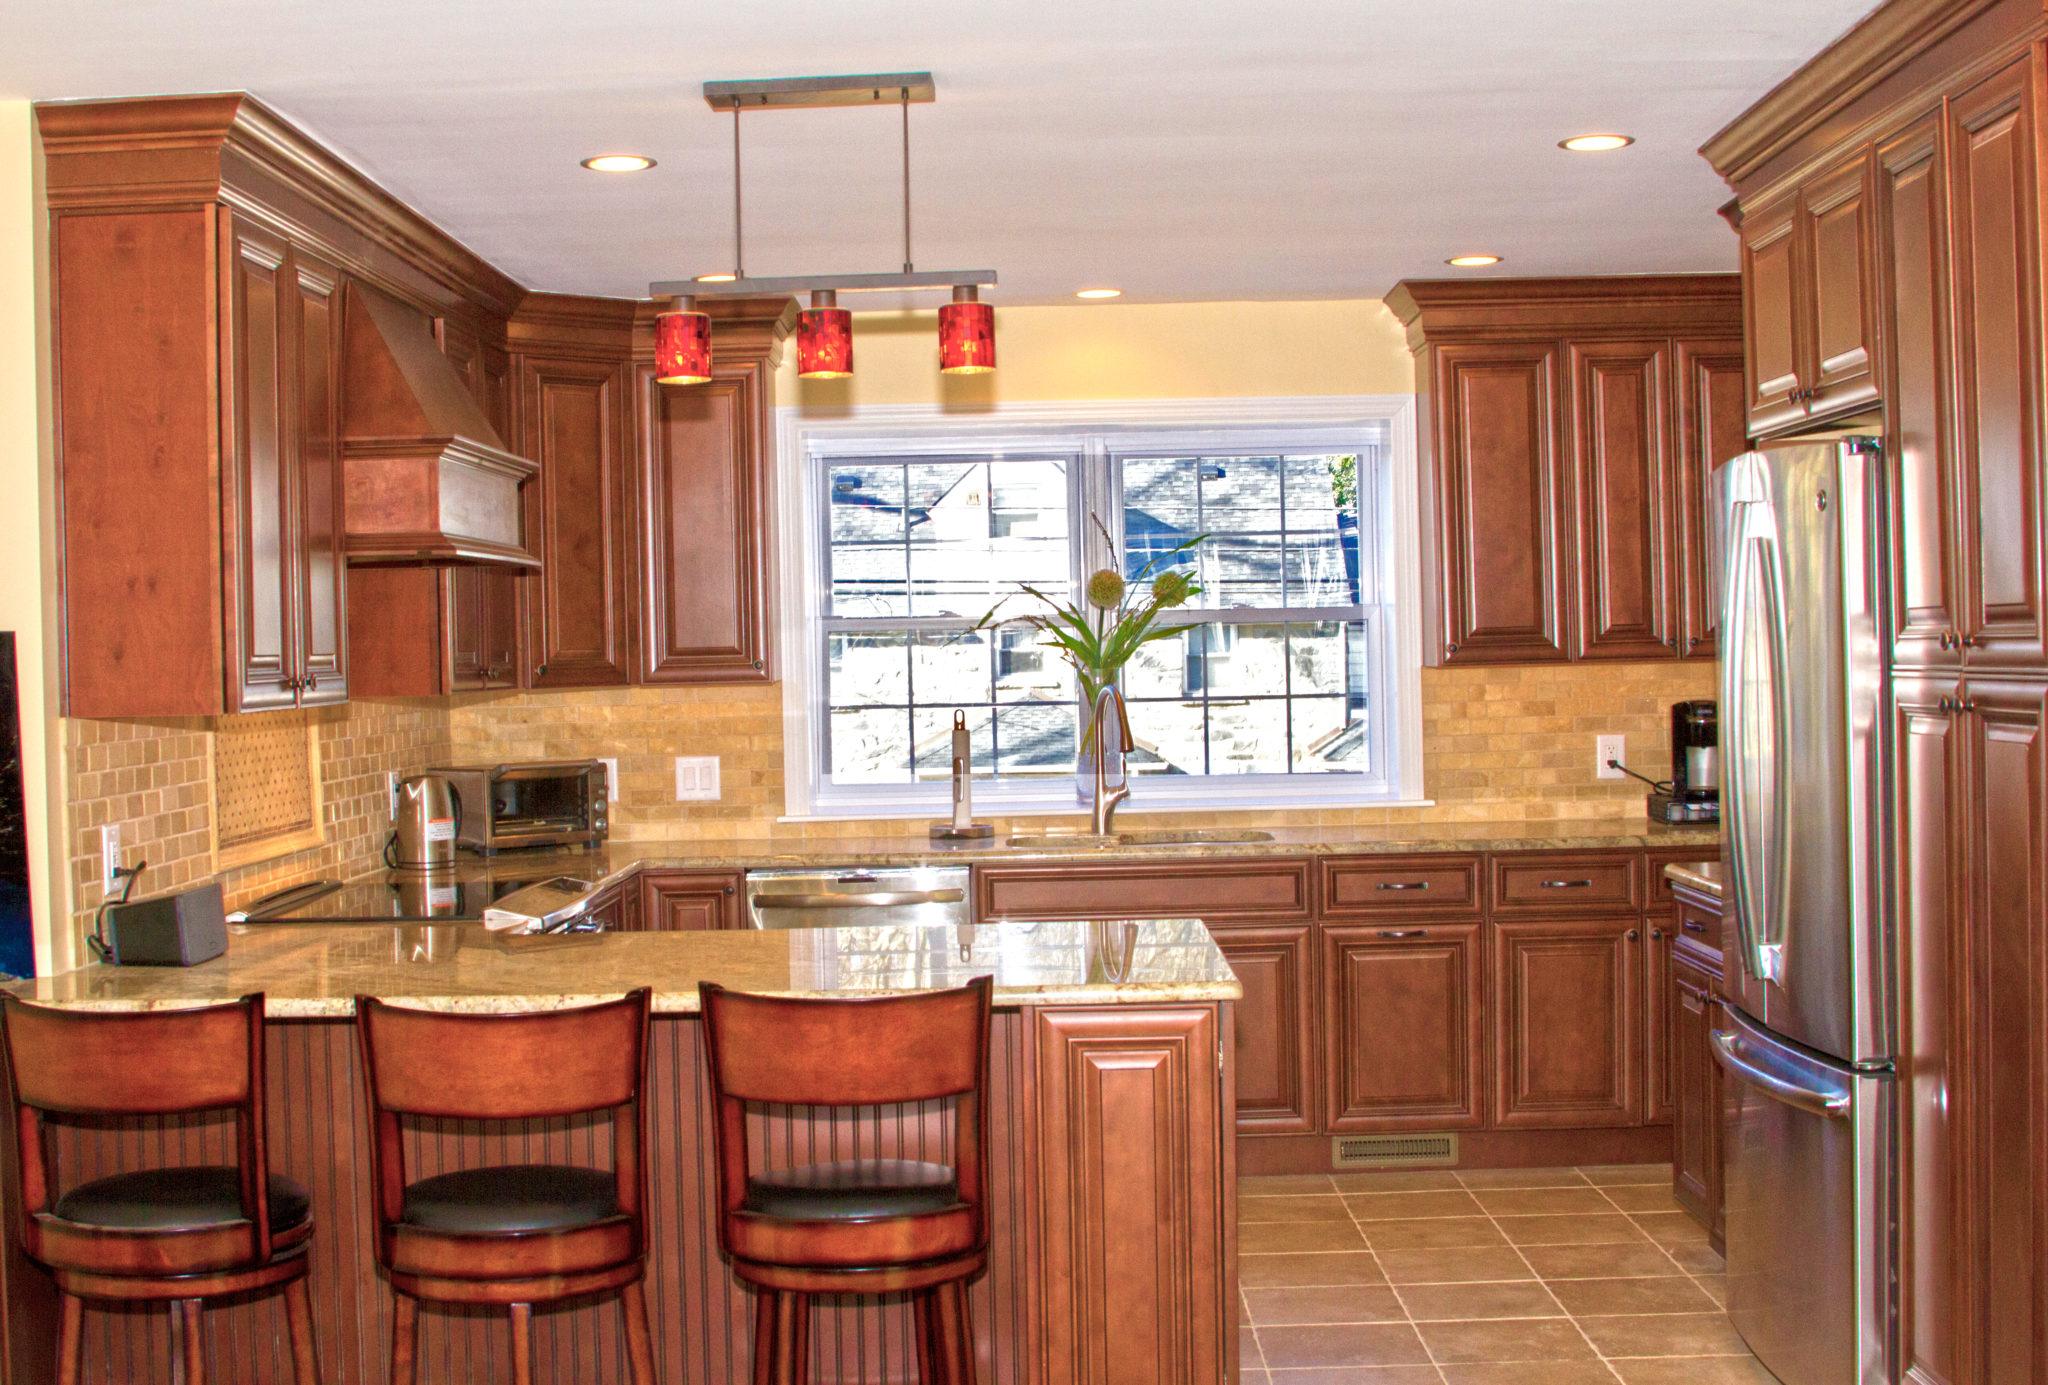 Chinese Kitchen Cabinets Make A Splash, Are Chinese Cabinets Good Quality